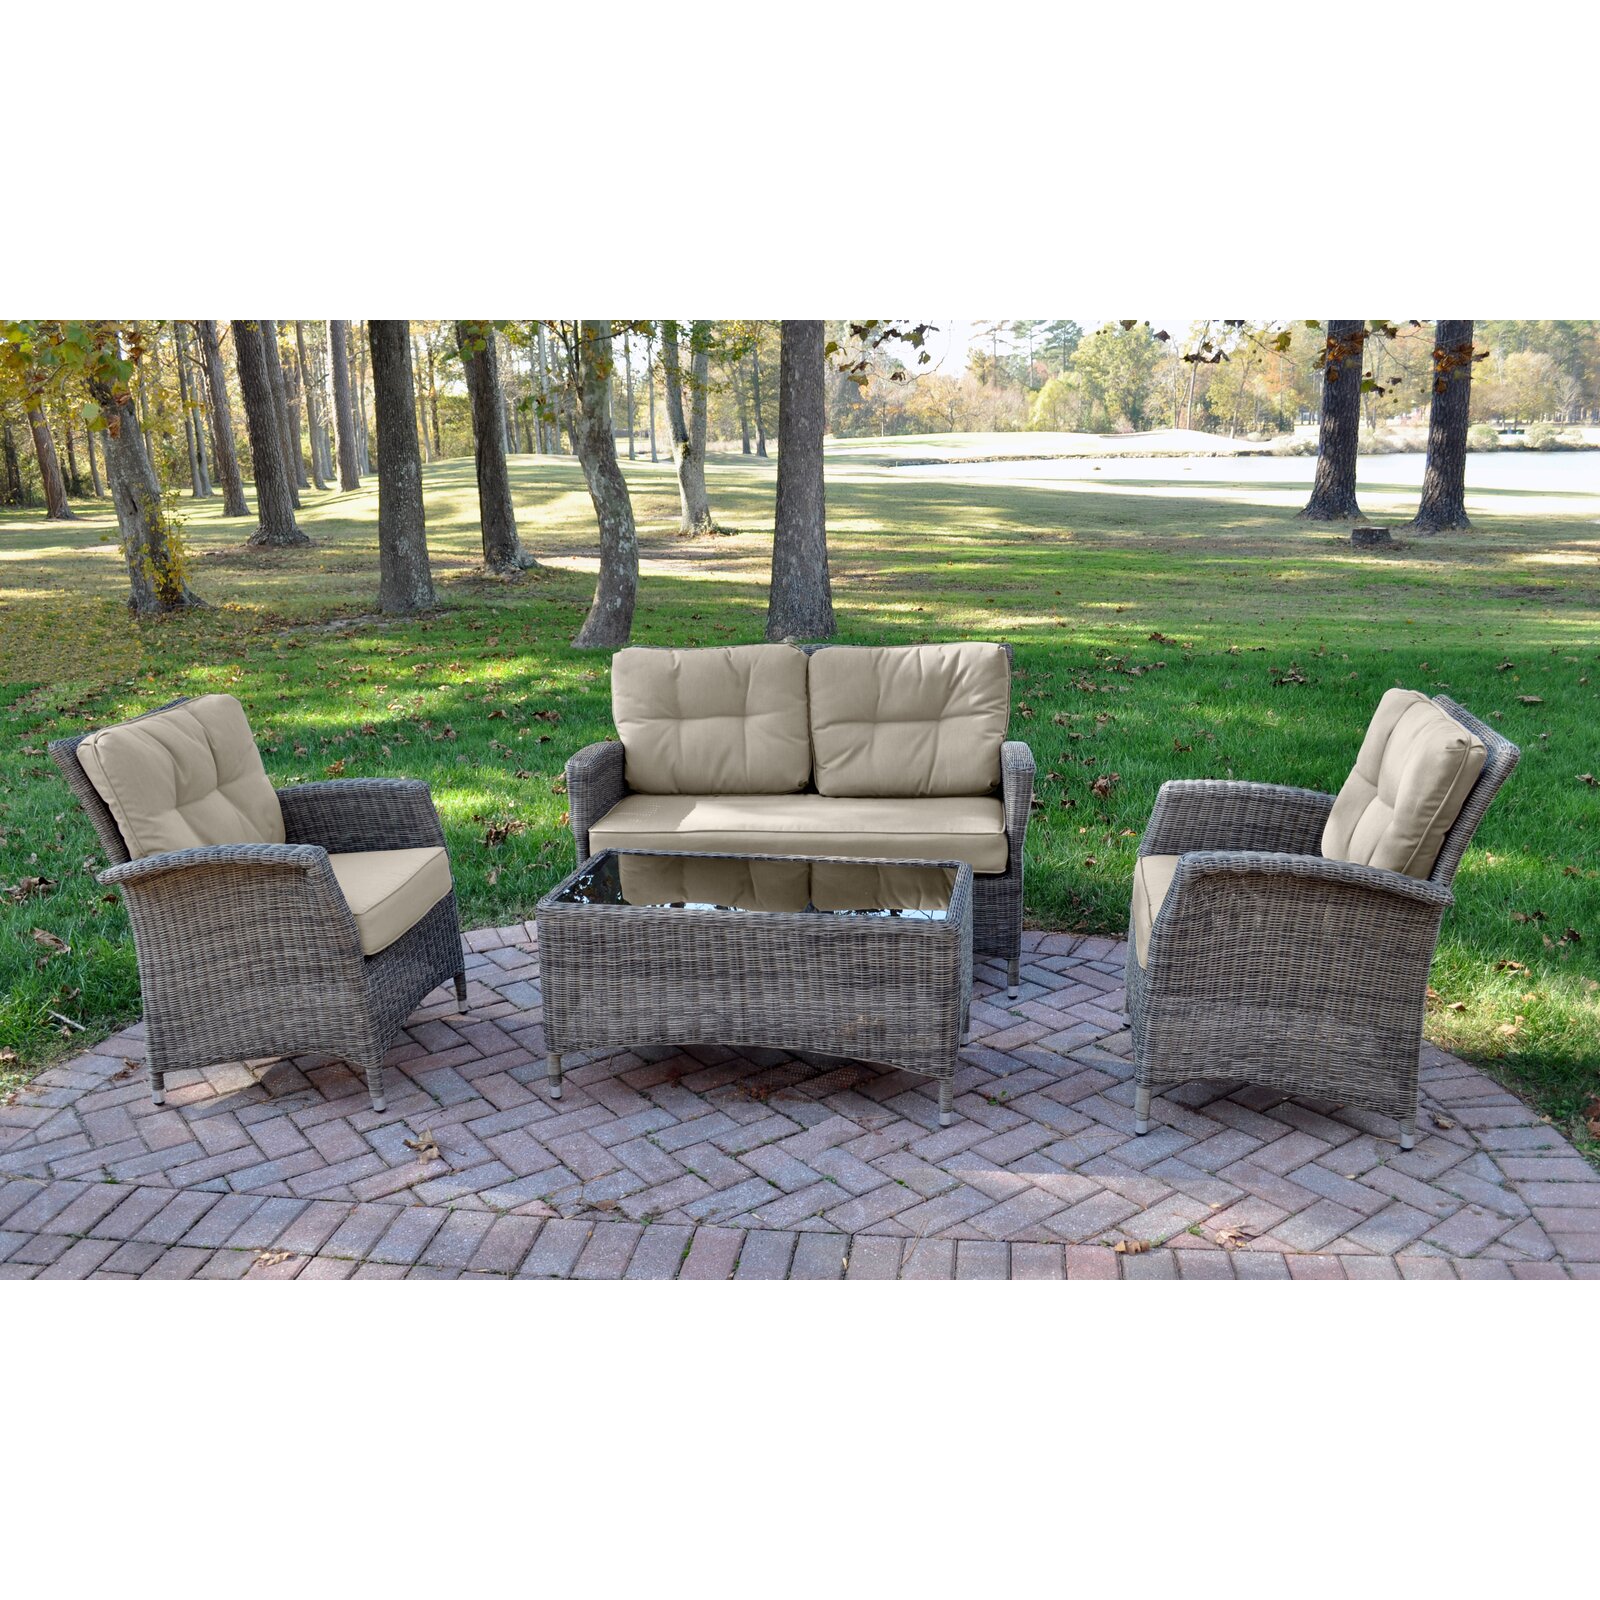 Kettler Wicker/Rattan 4 - Person Seating Group with Cushions